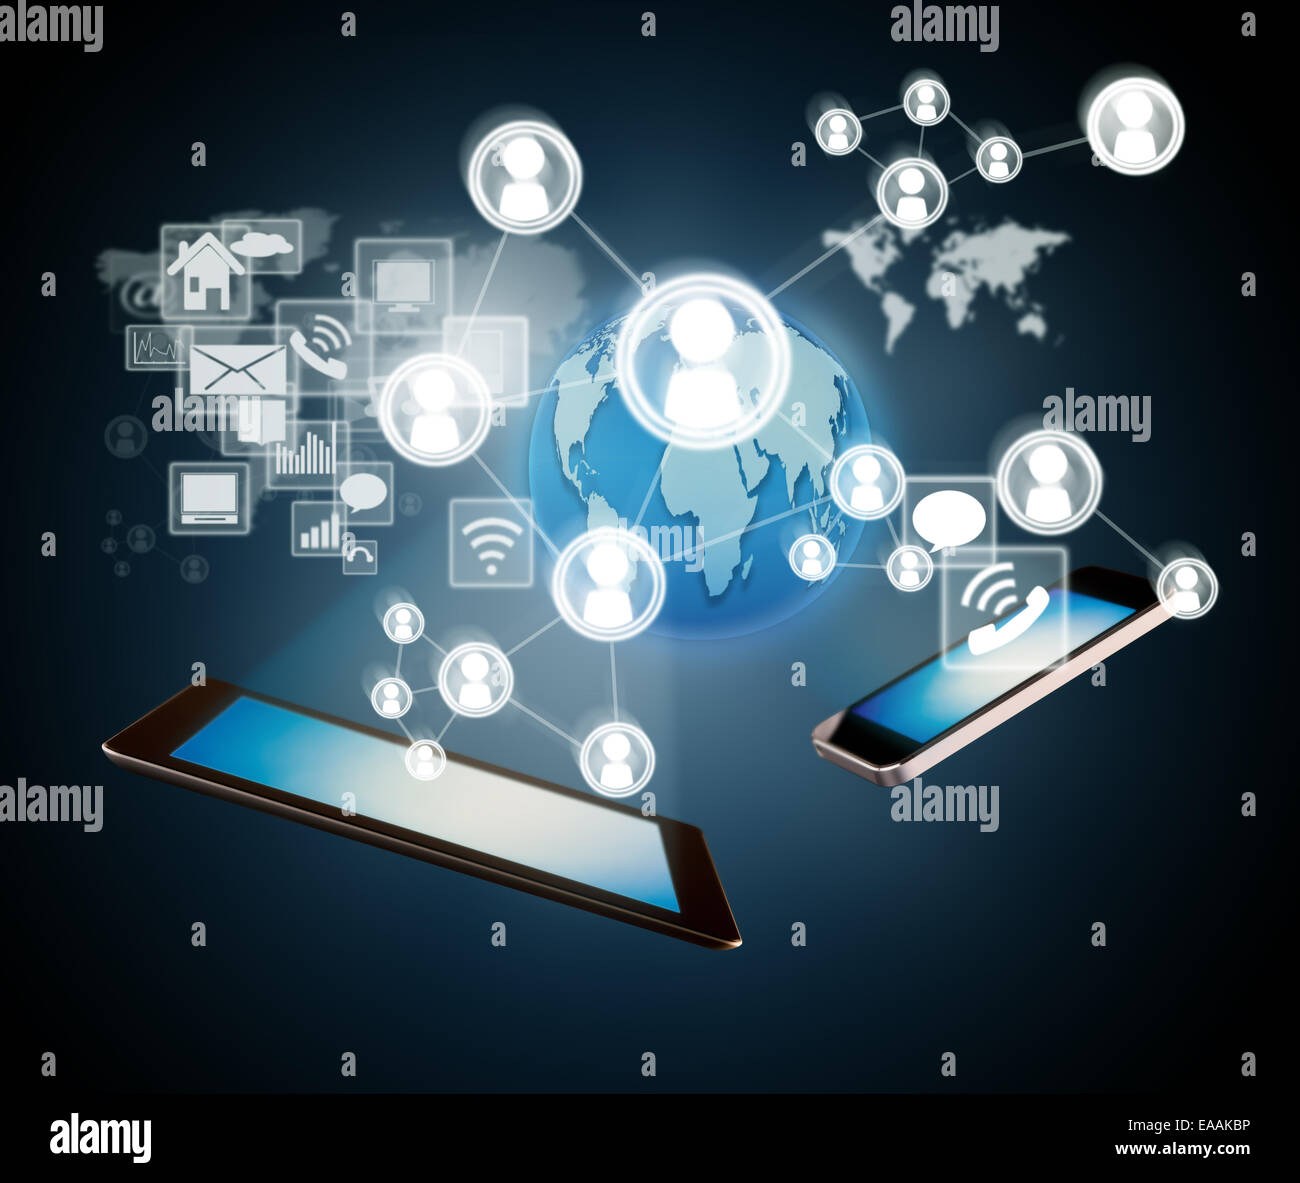 Technology concept with smart phone and tablet and virtual icons around Stock Photo